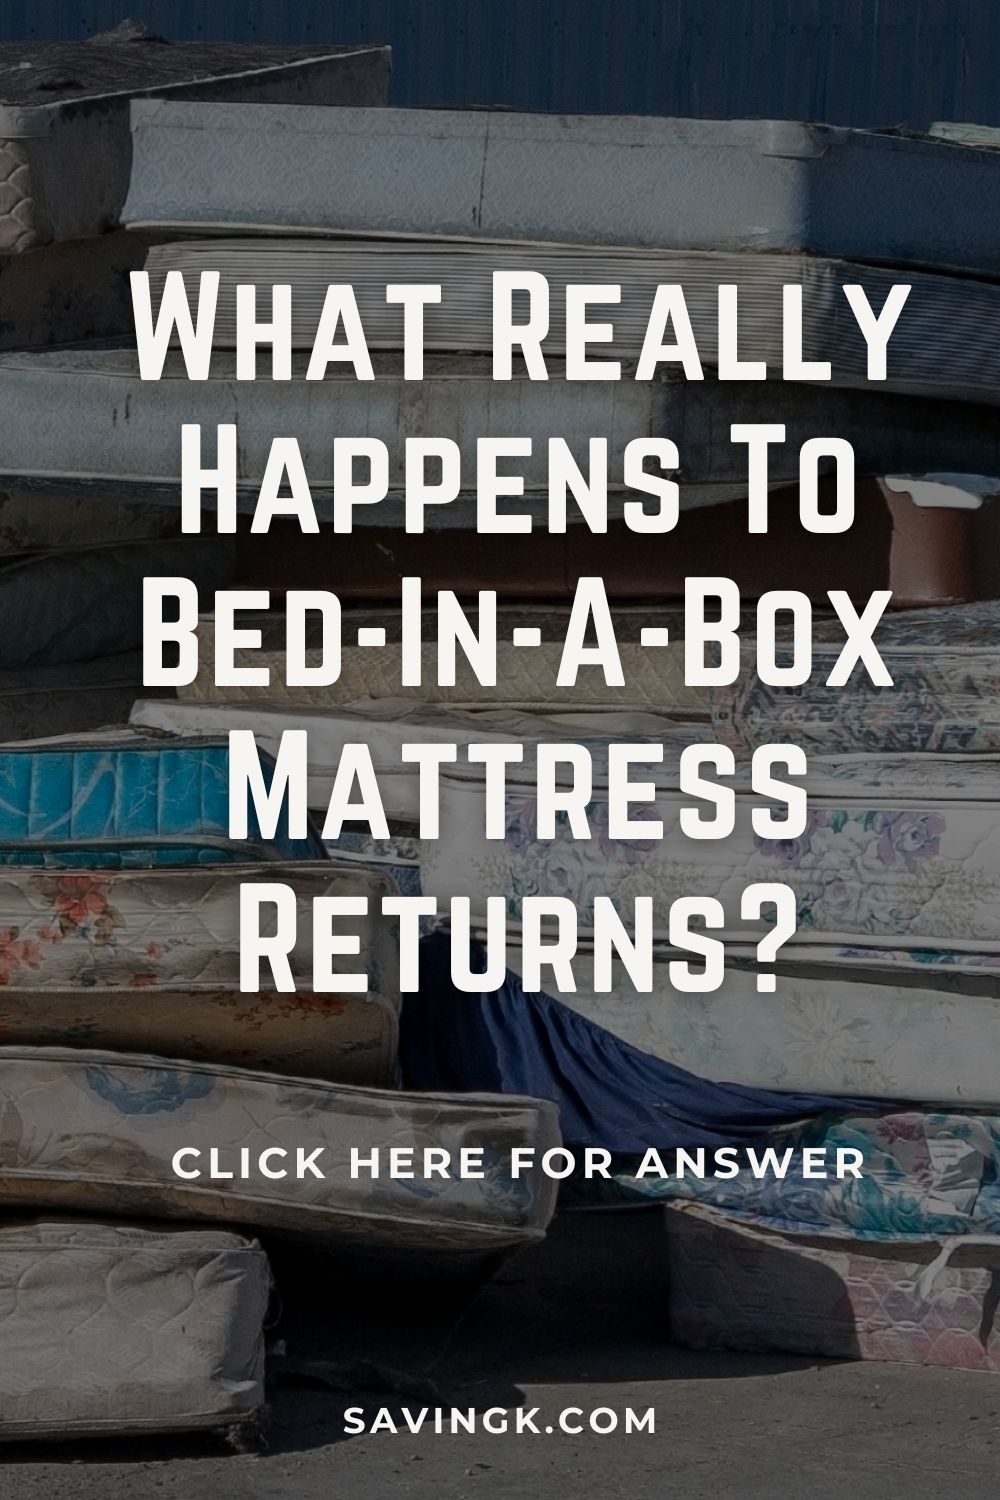 What Happens To Bed-In-A-Box Mattress Returns?